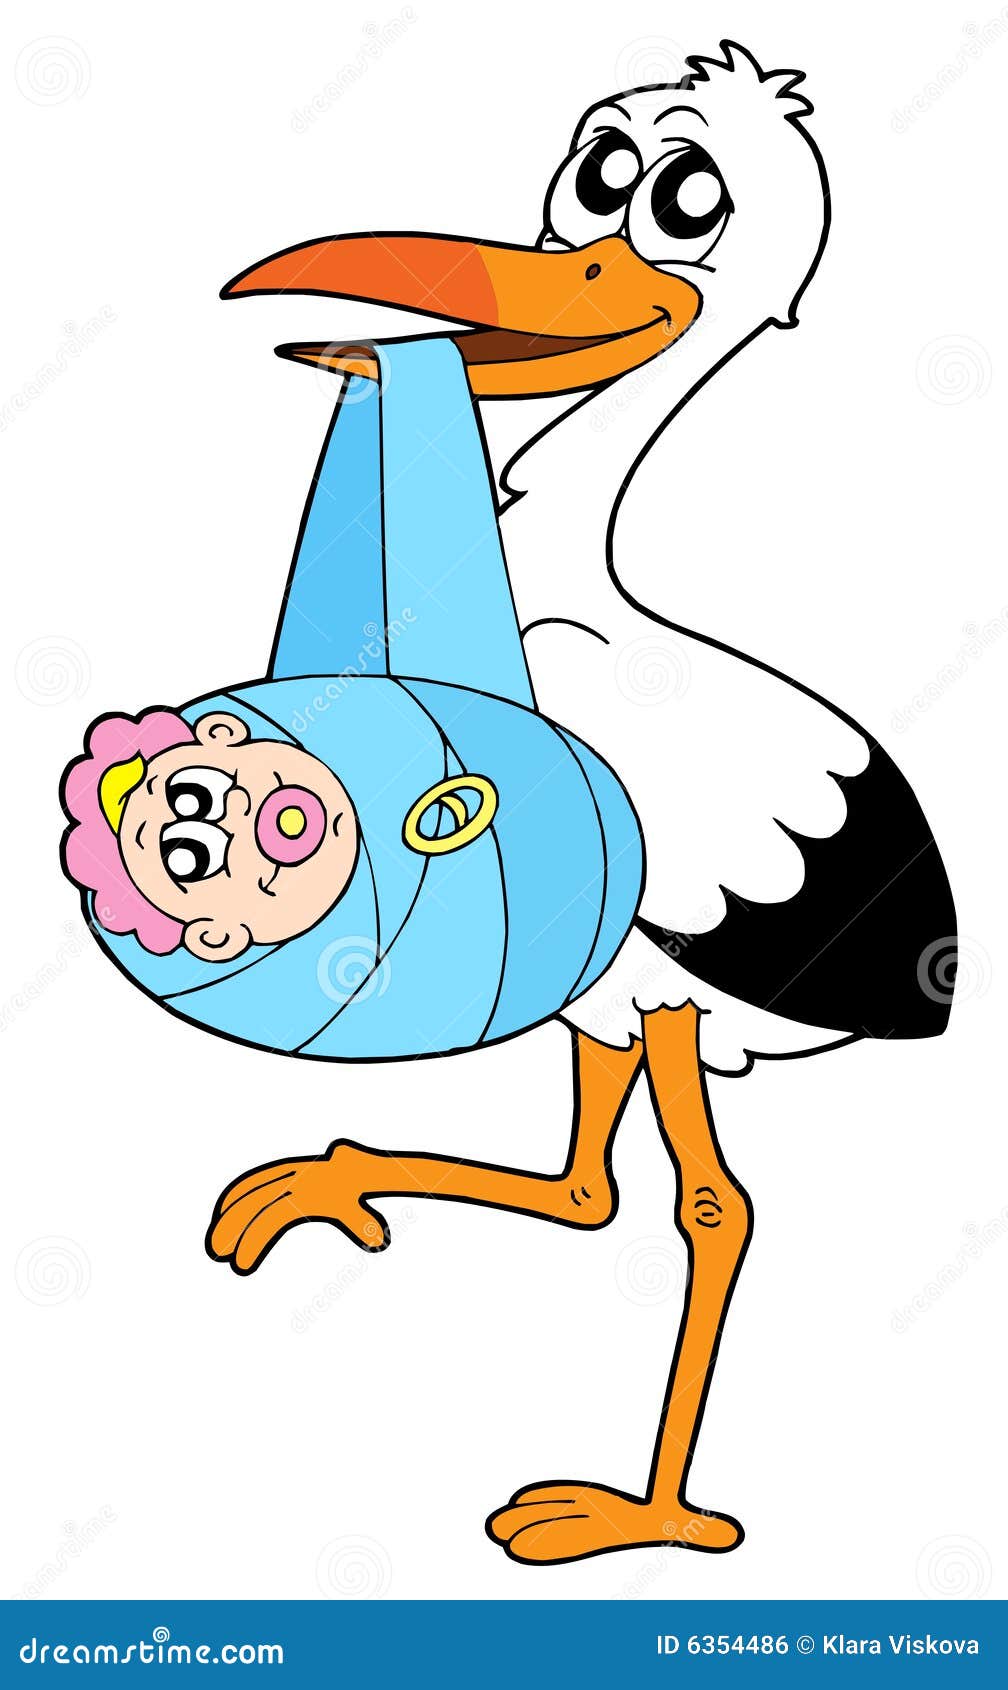 clipart image stork holding a baby - photo #6